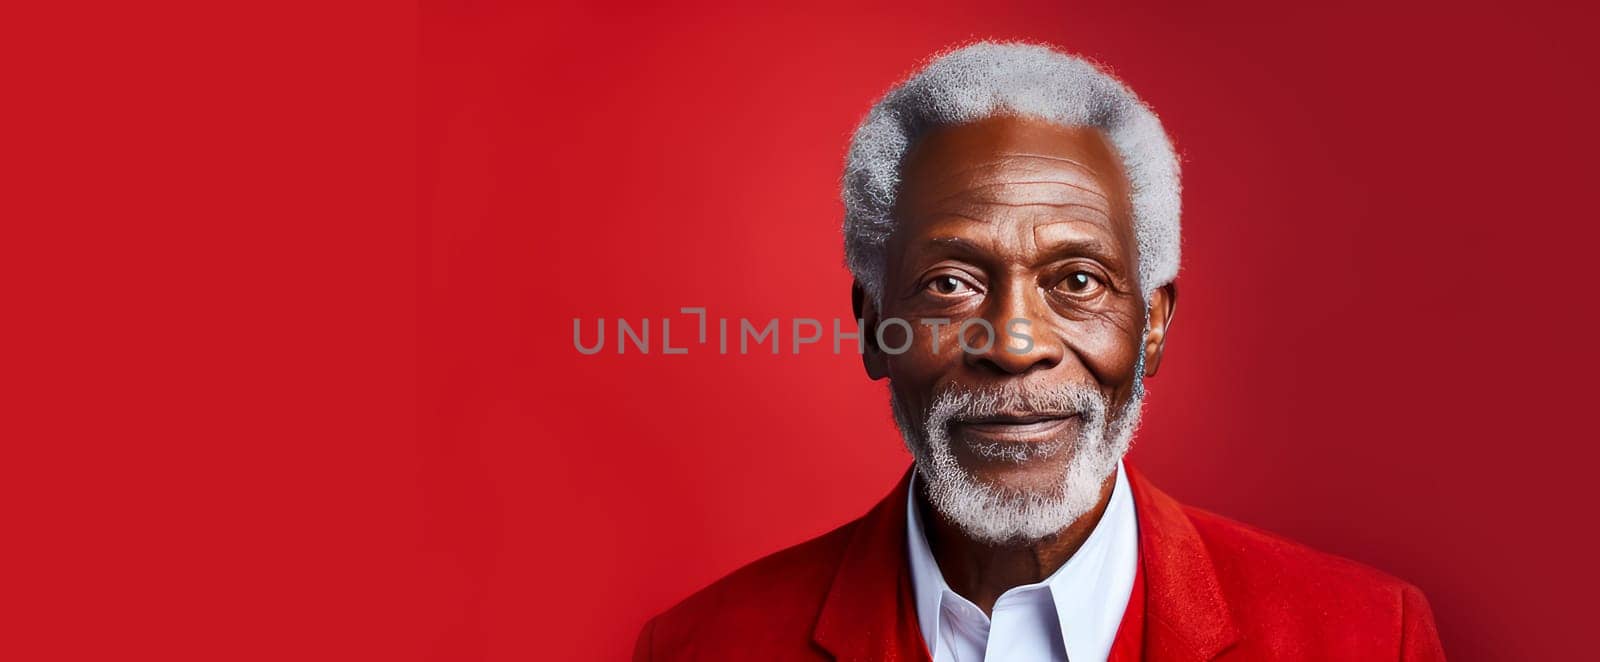 Handsome elegant, elderly African American man, on a red background, banner, close-up, copy space. by Alla_Yurtayeva